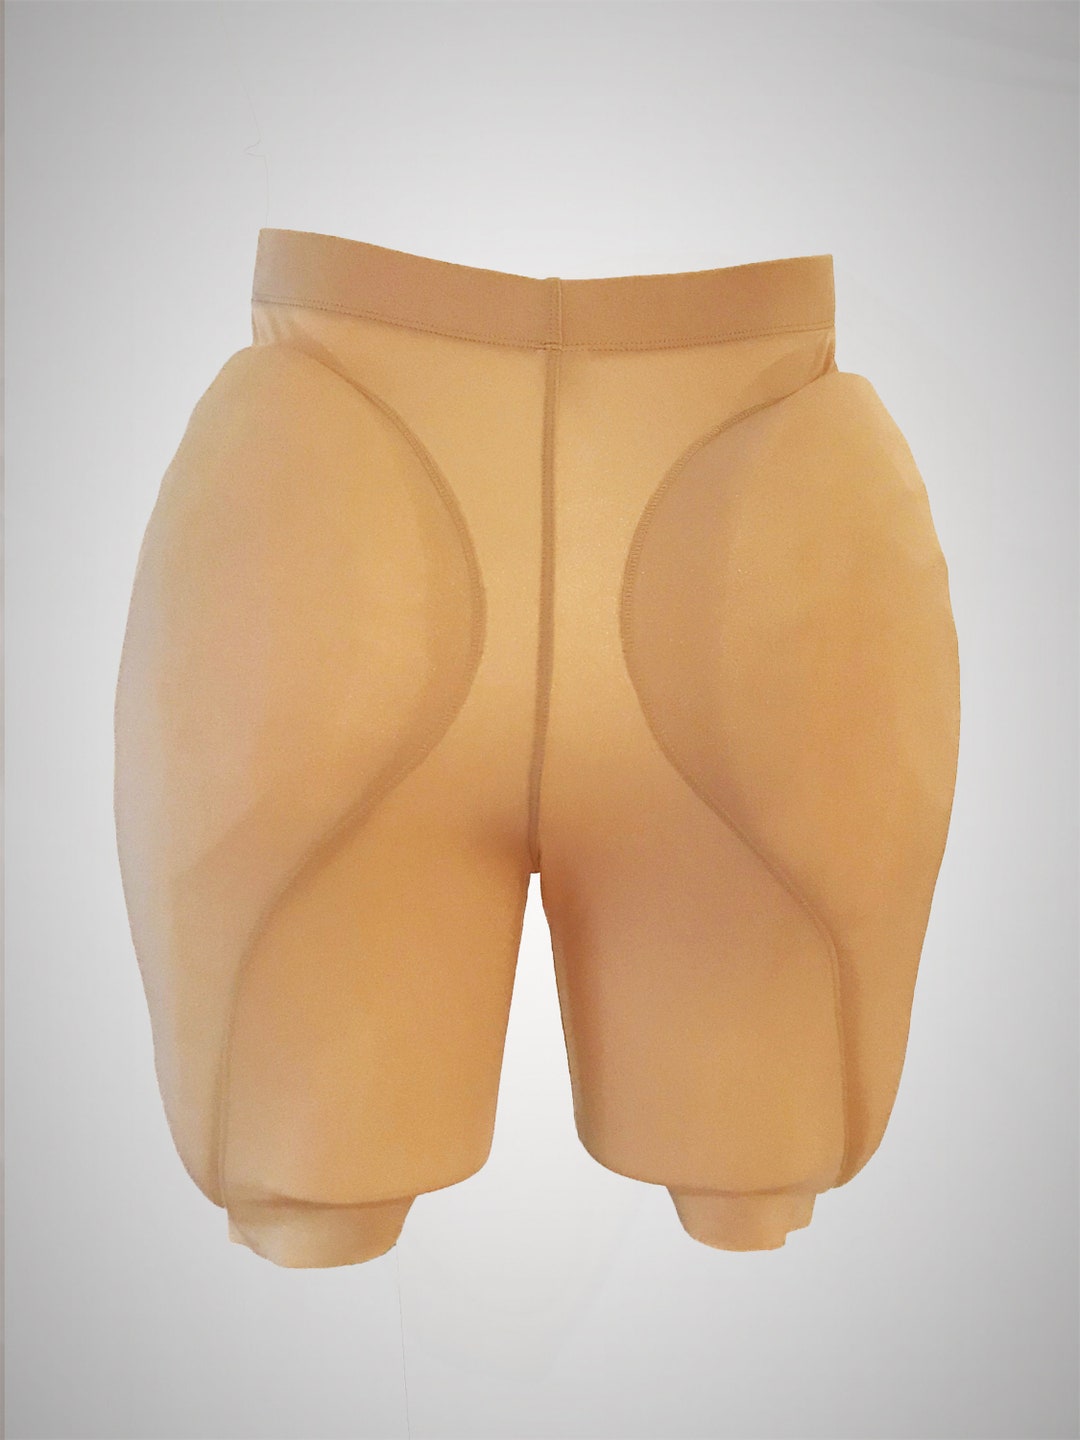 1 Inch Astrobooty Hip/butt Pads for M2F and Cross Dressers -  Canada